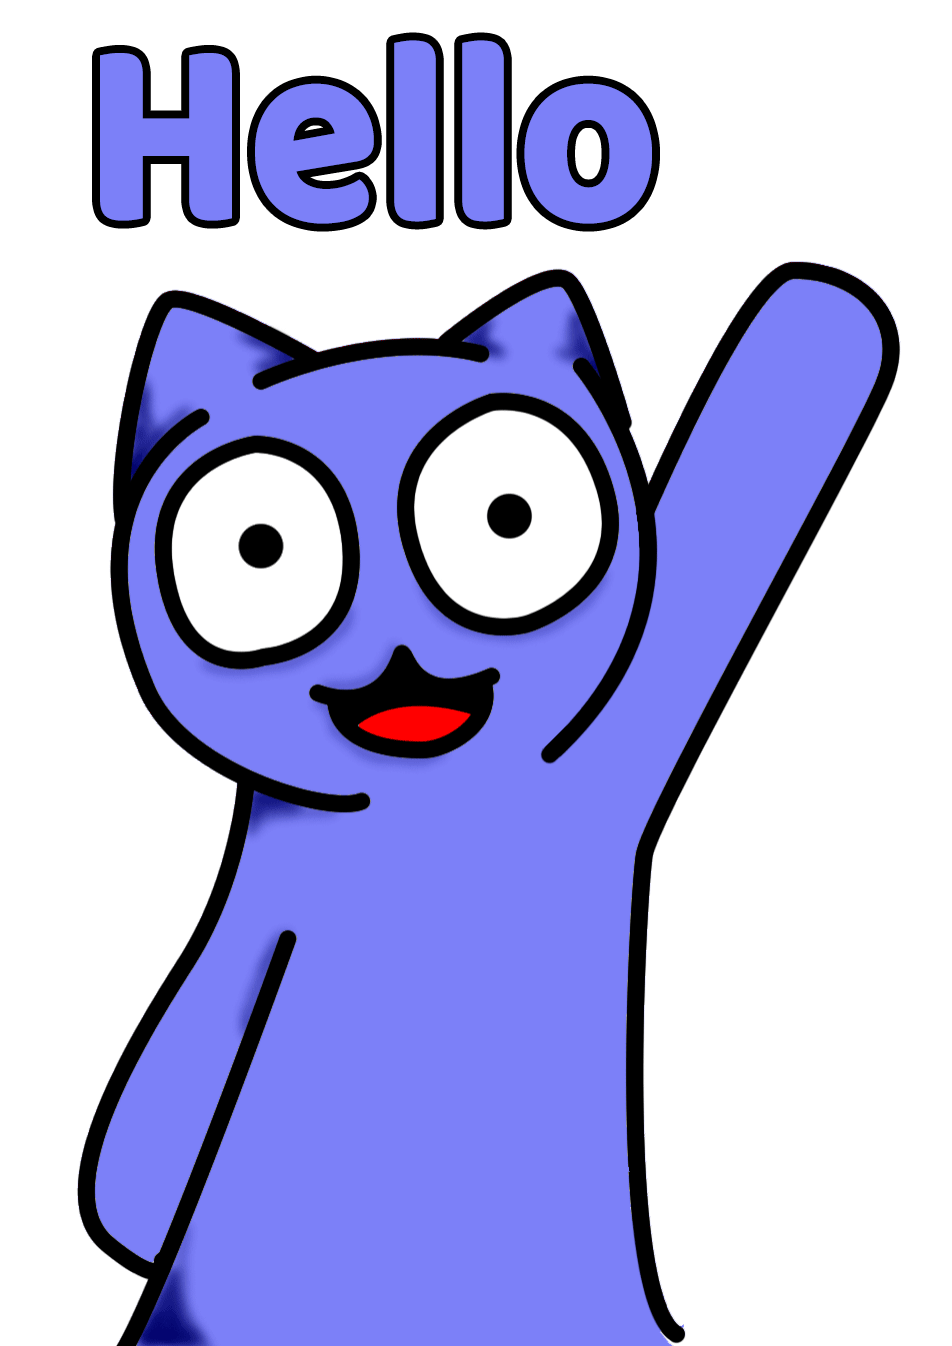 A blue cat waves hello to everyone